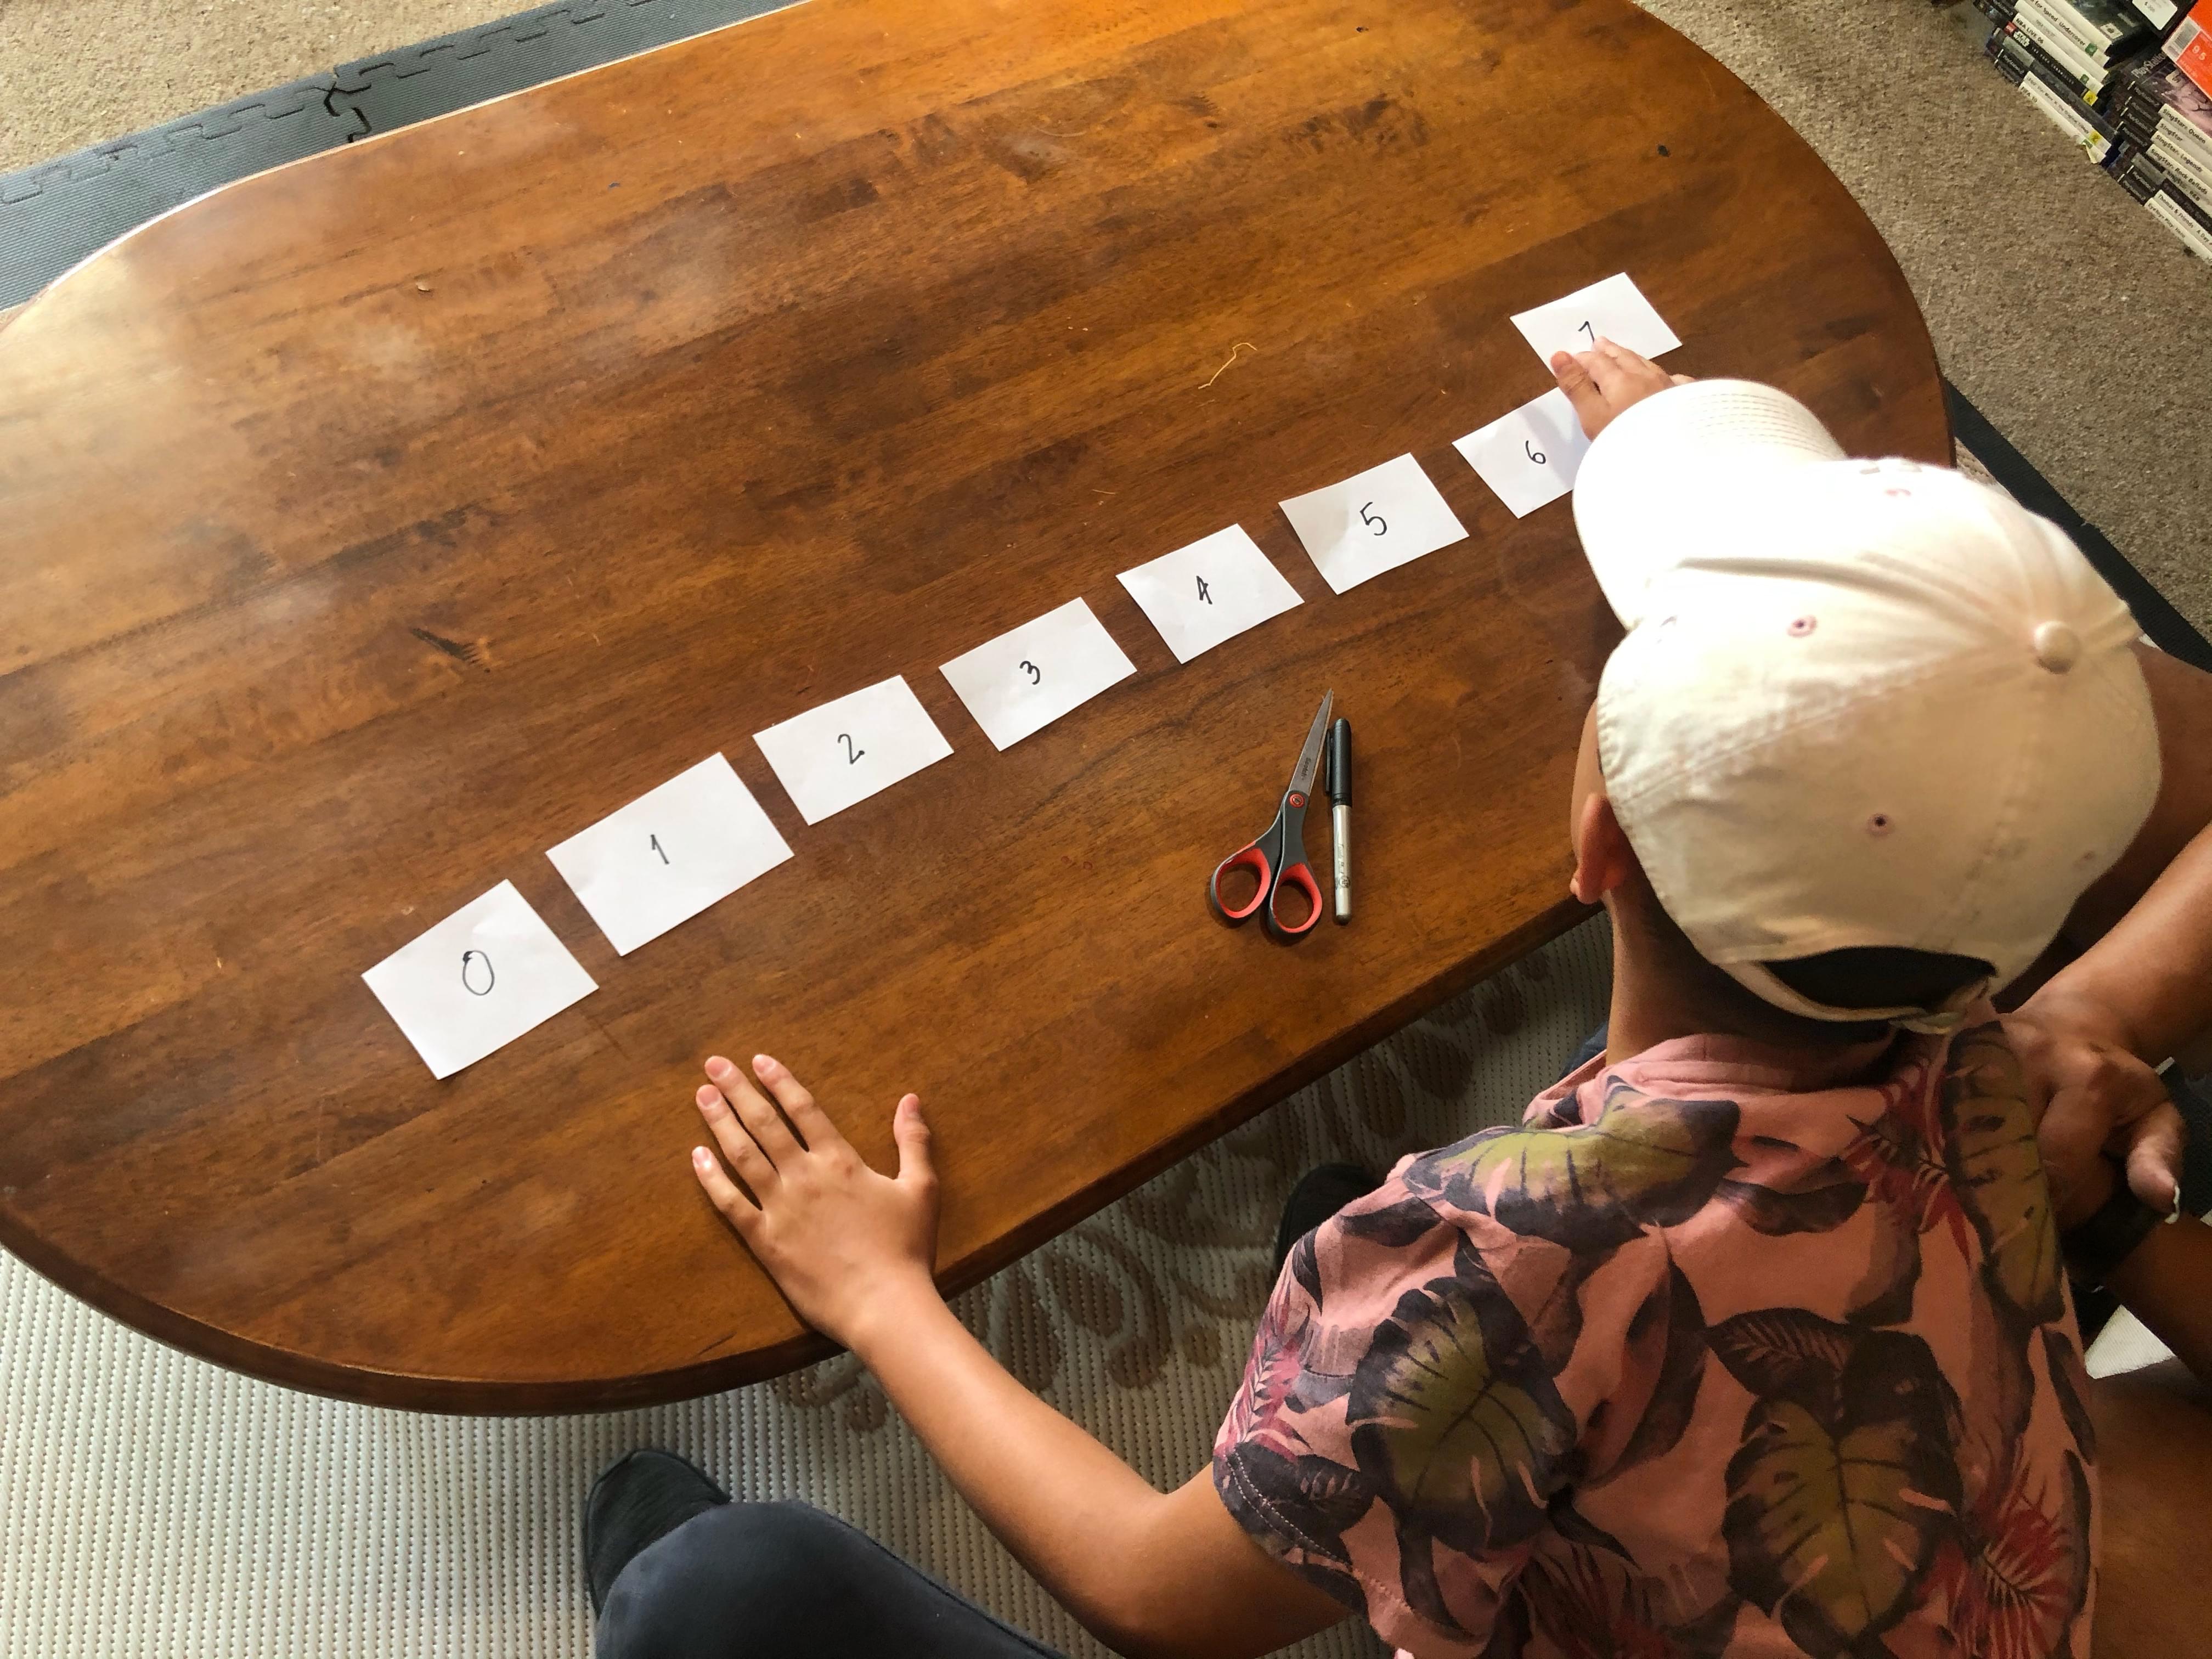 Child placing the 8 cards in order from lowest to highest.